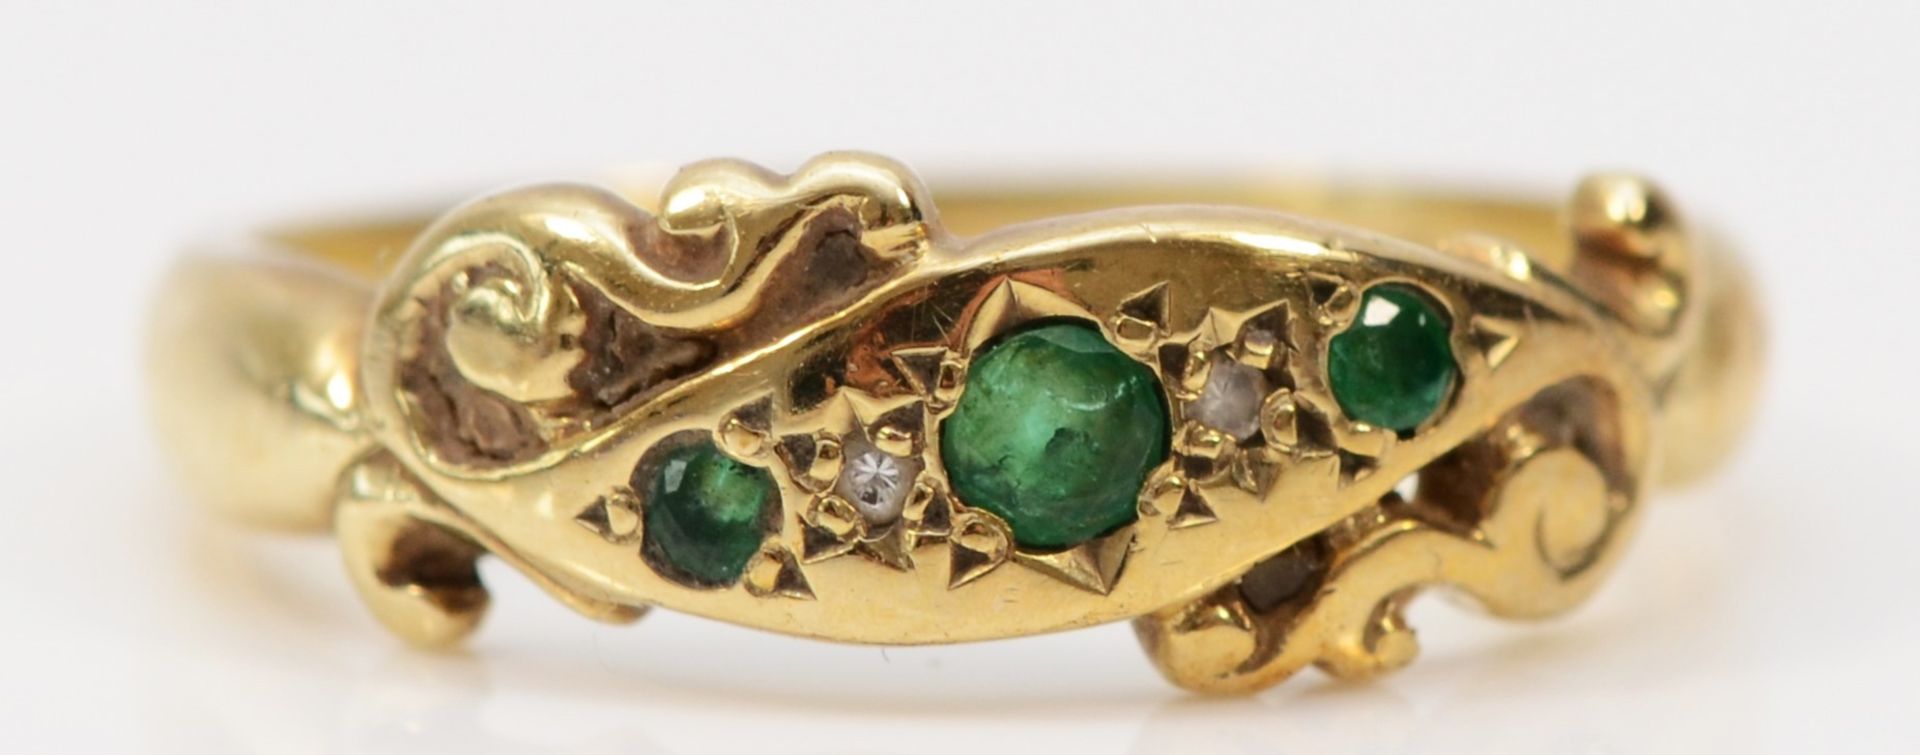 A 9ct gold gold Edwardian style emerald and brilliant cut diamond five stone ring, O 1/2, 2.7gm